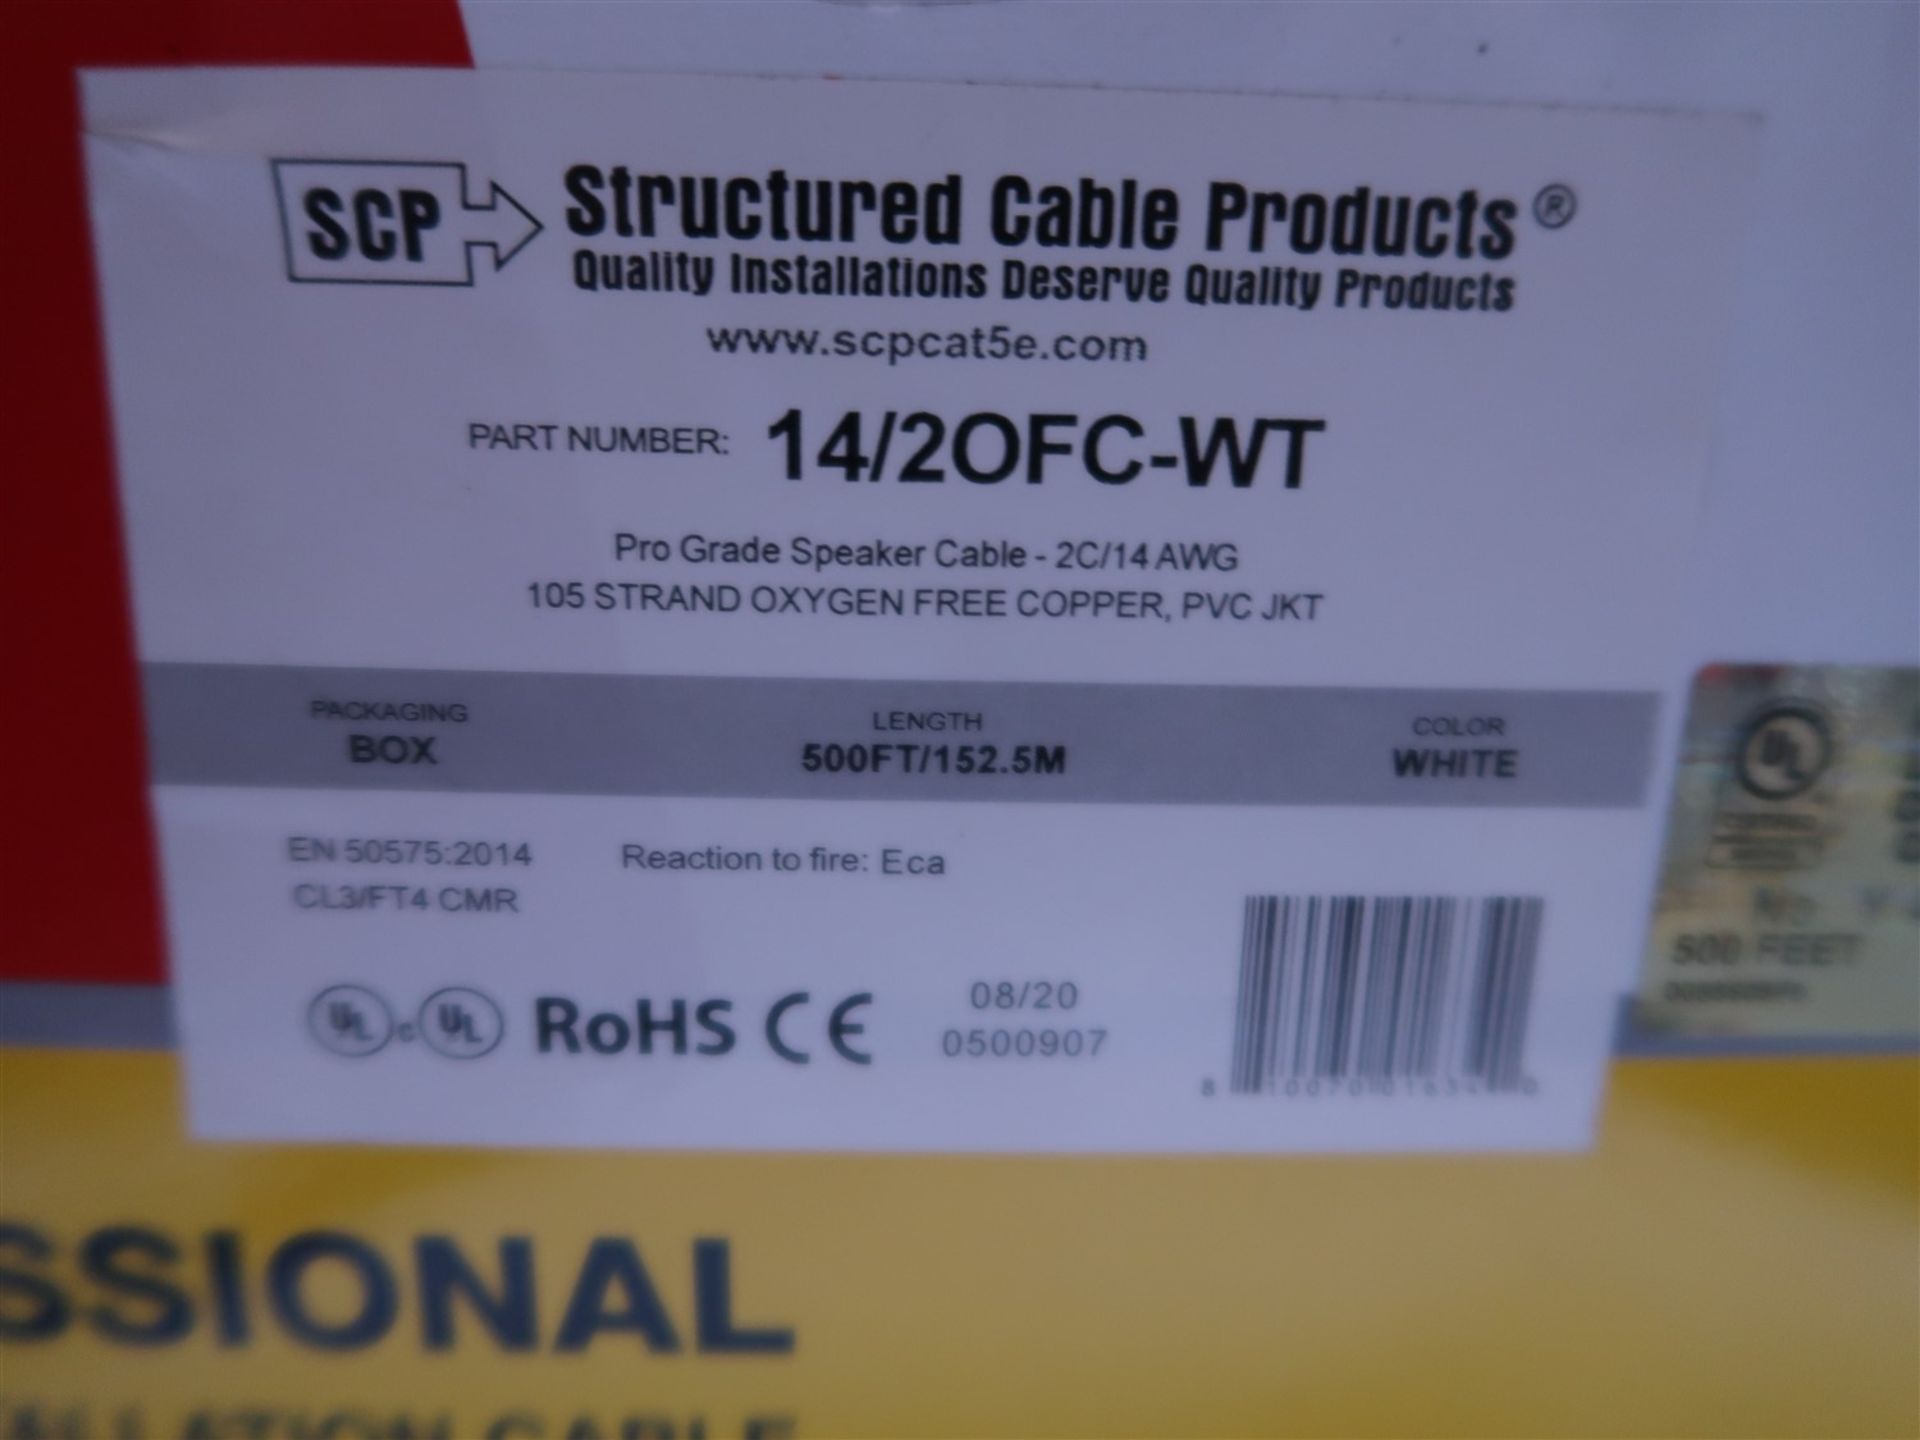 BOX OF SCP 14/20 FC-WT PRO GRADE CABLE - 2 C/14 AWG, 105 STRAND OXYGEN FREE COPPER, PVC JKT 500 - Image 2 of 2